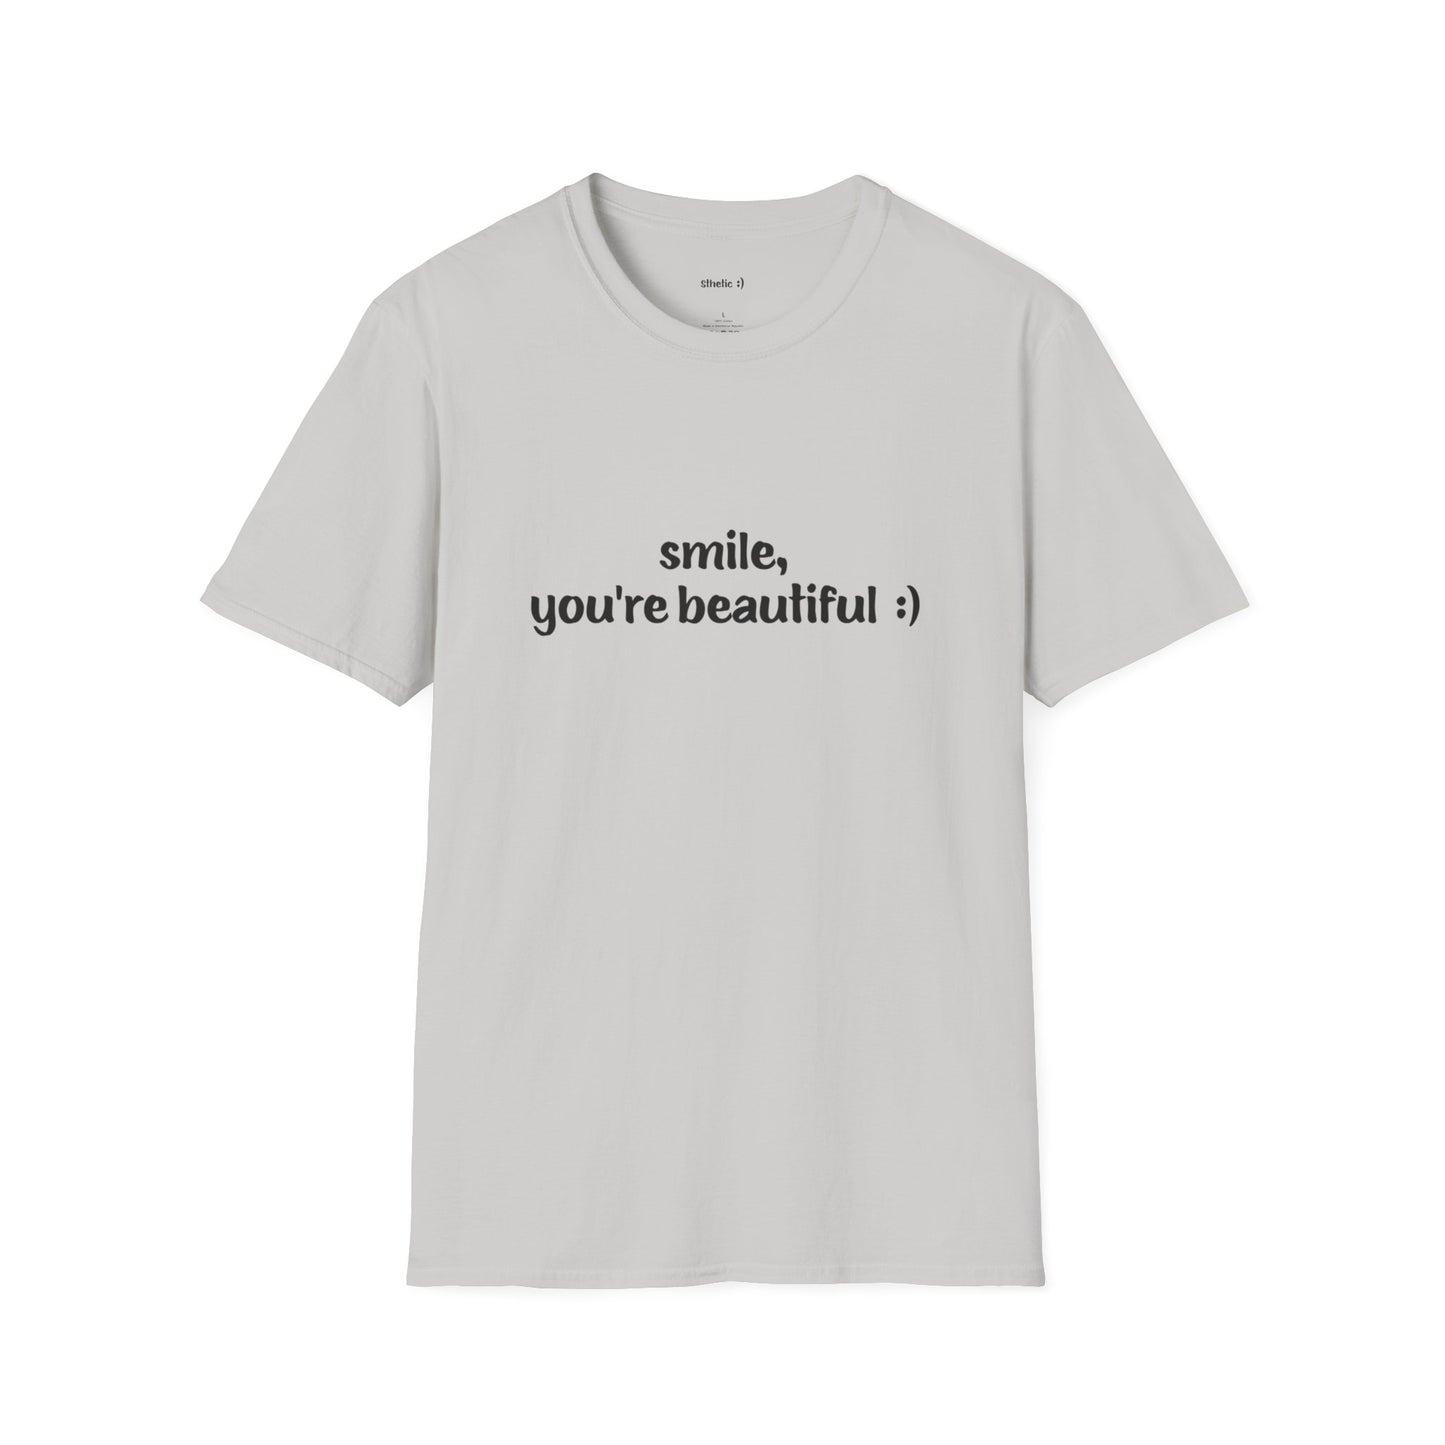 smile, you're beautiful :) | unisex casual t-shirt